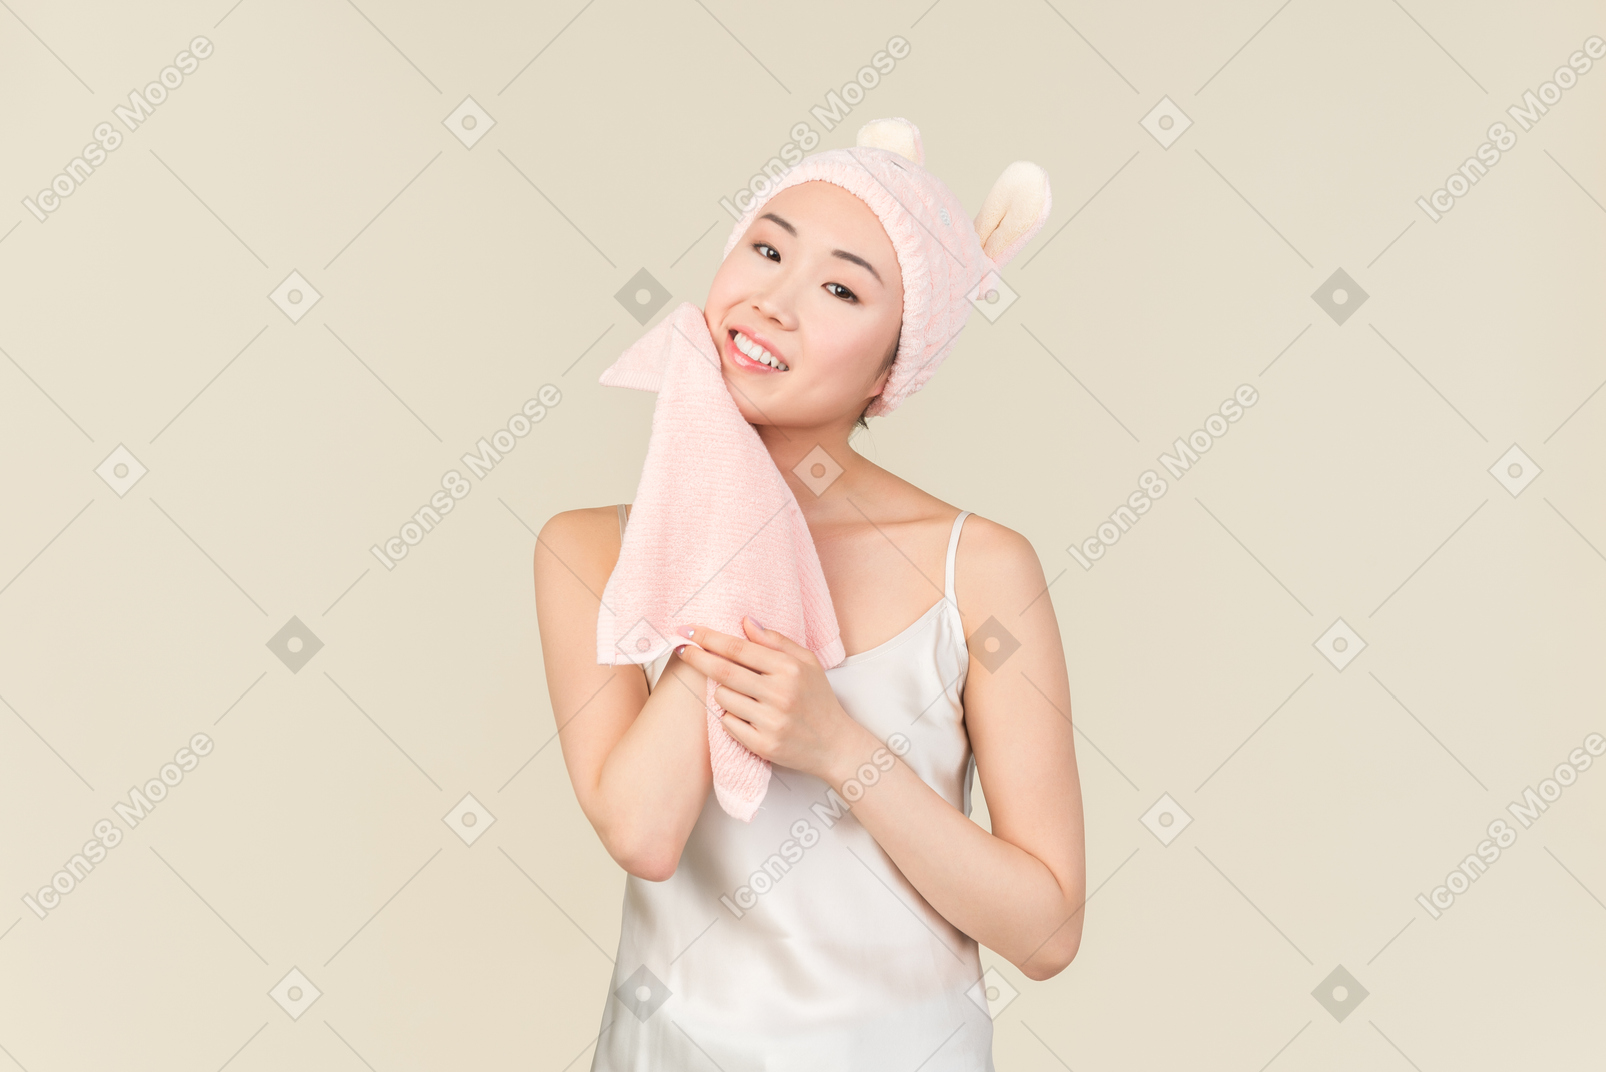 Washing face after beauty routine time